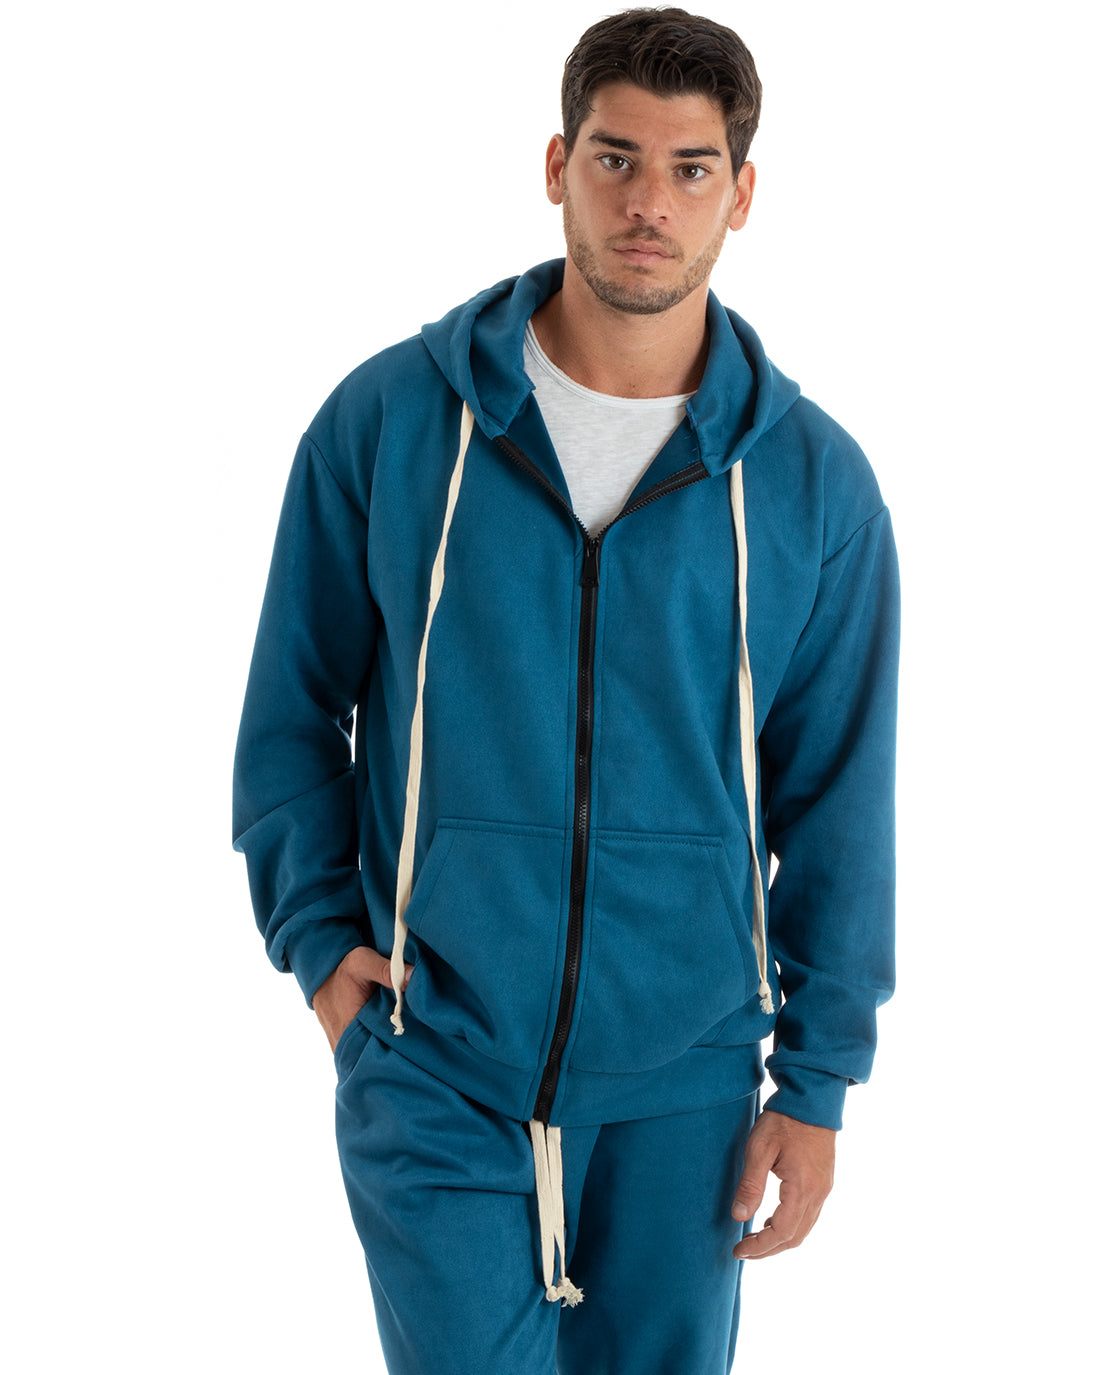 Men's Tracksuit Set, Hooded Sweatshirt and Zip Trousers with Drawstring Waist in Petrol Eco Suede GIOSAL-OU2400A